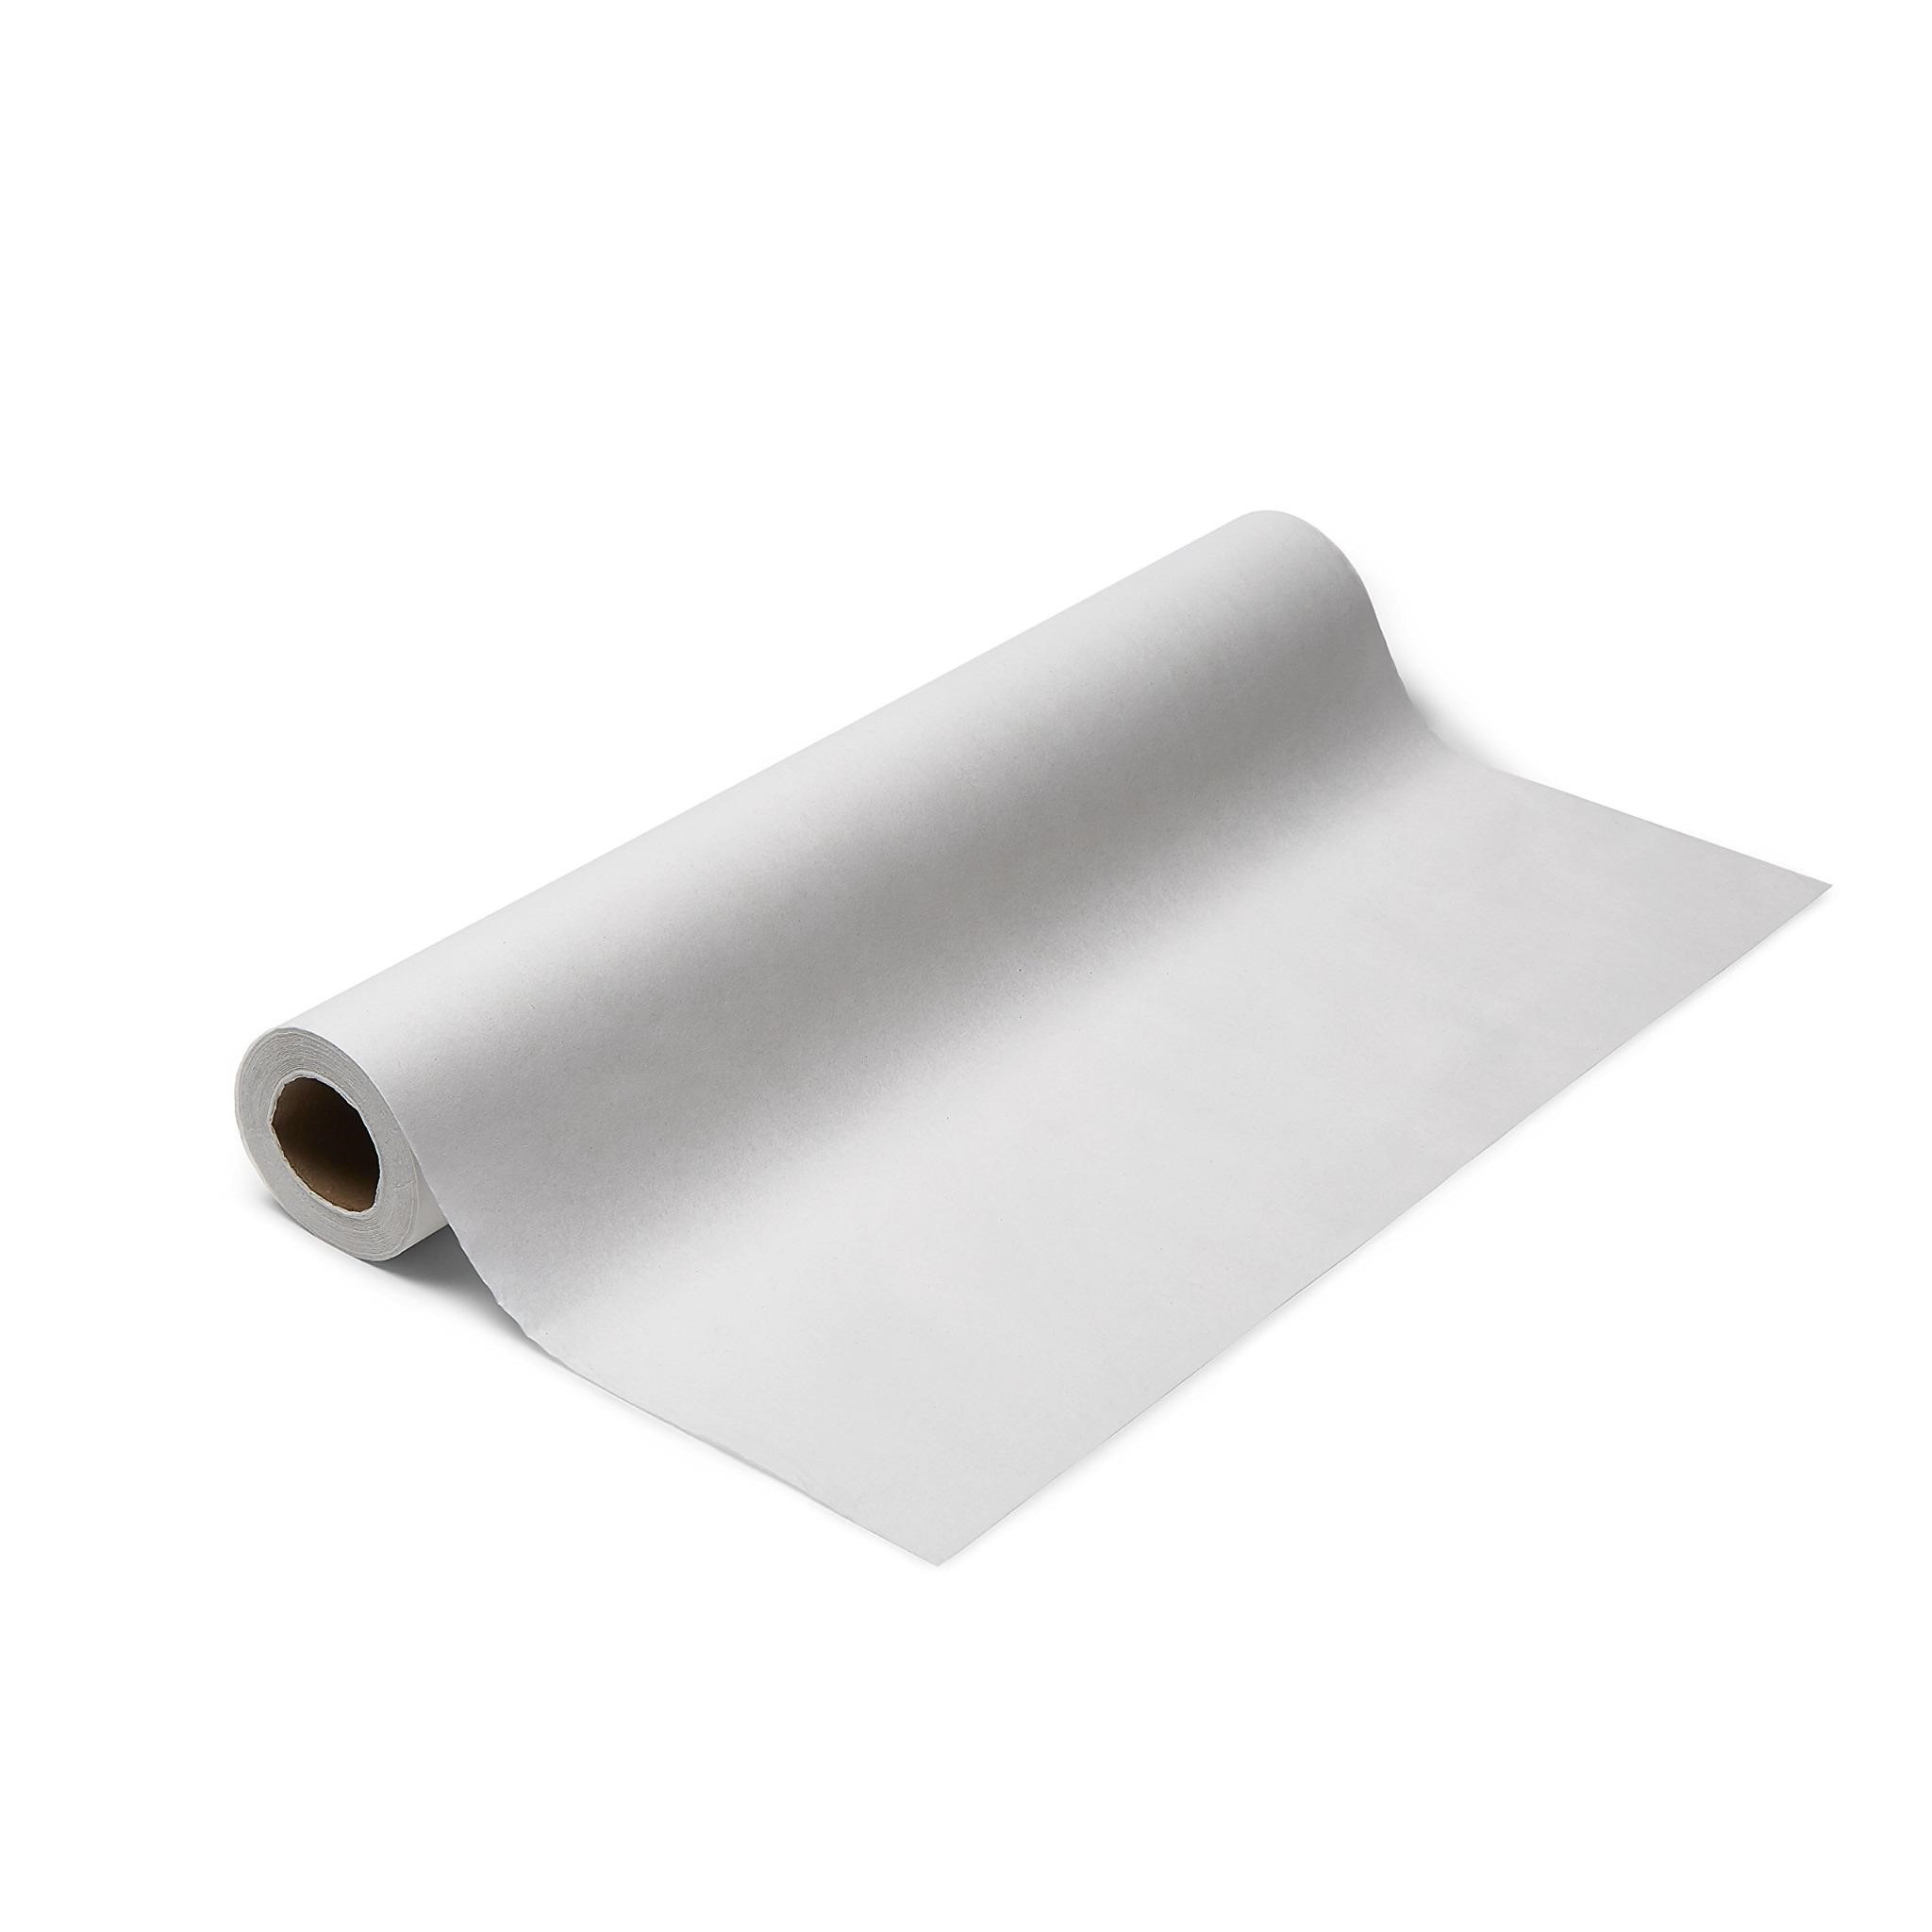 Medline Medical Exam Table Paper, Crepe Table